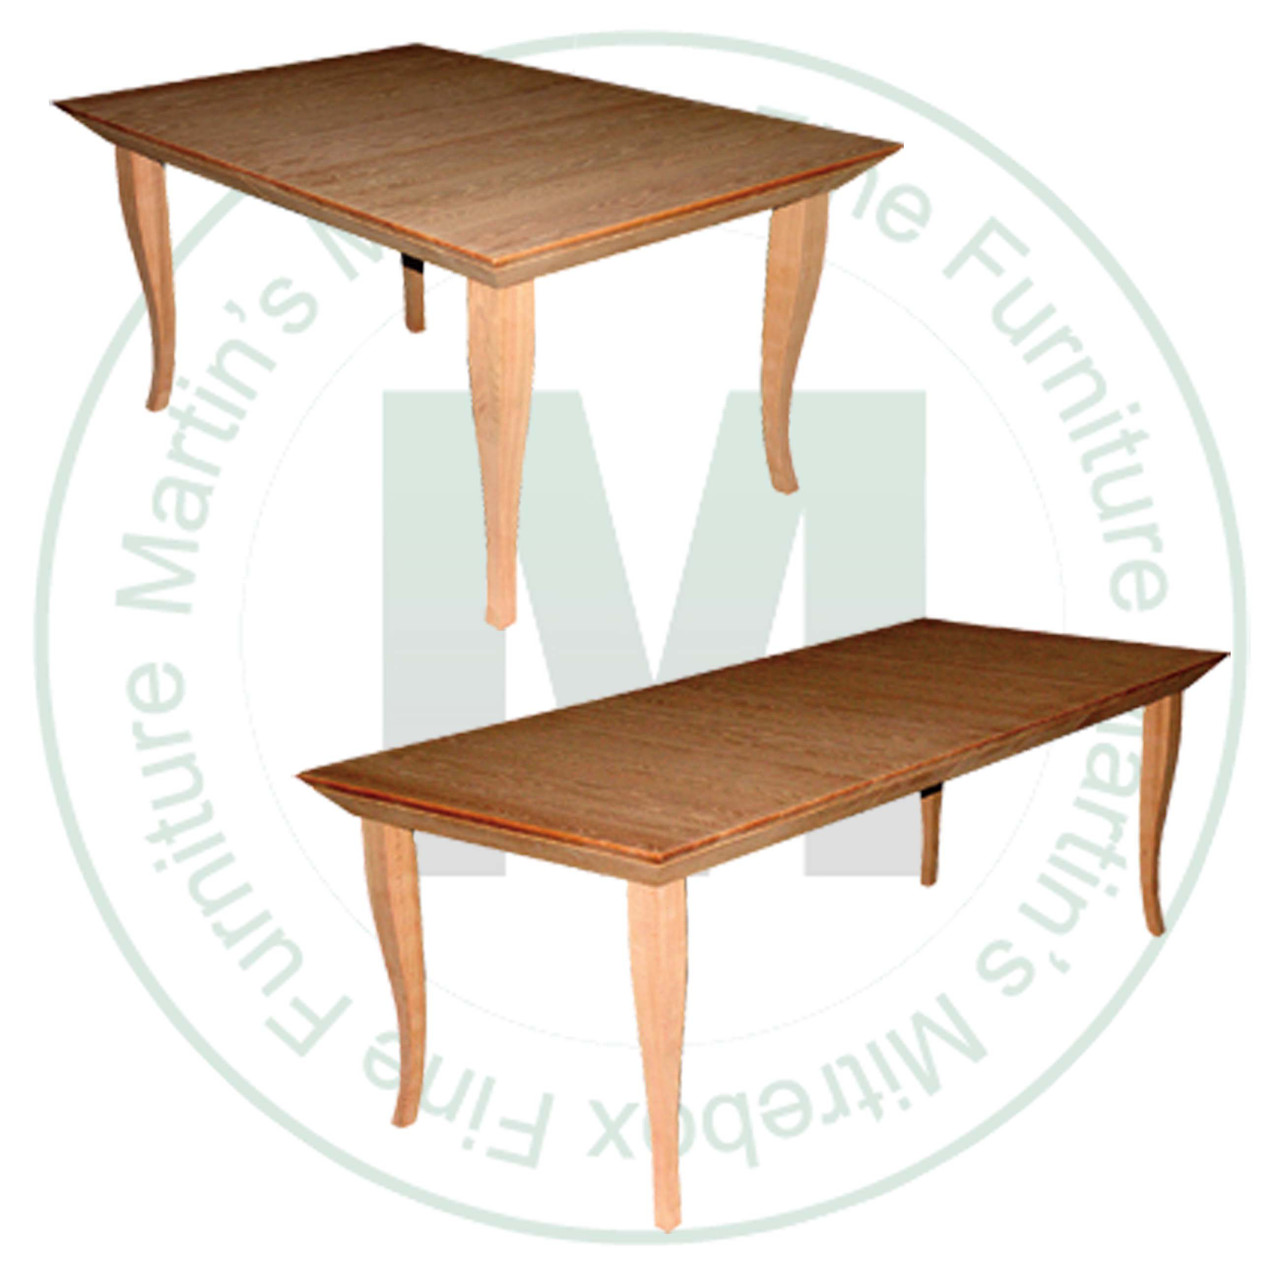 Wormy Maple Bauhaus Extension Harvest Table 48''D x 60''W x 30''H With 2 - 12'' Leaves